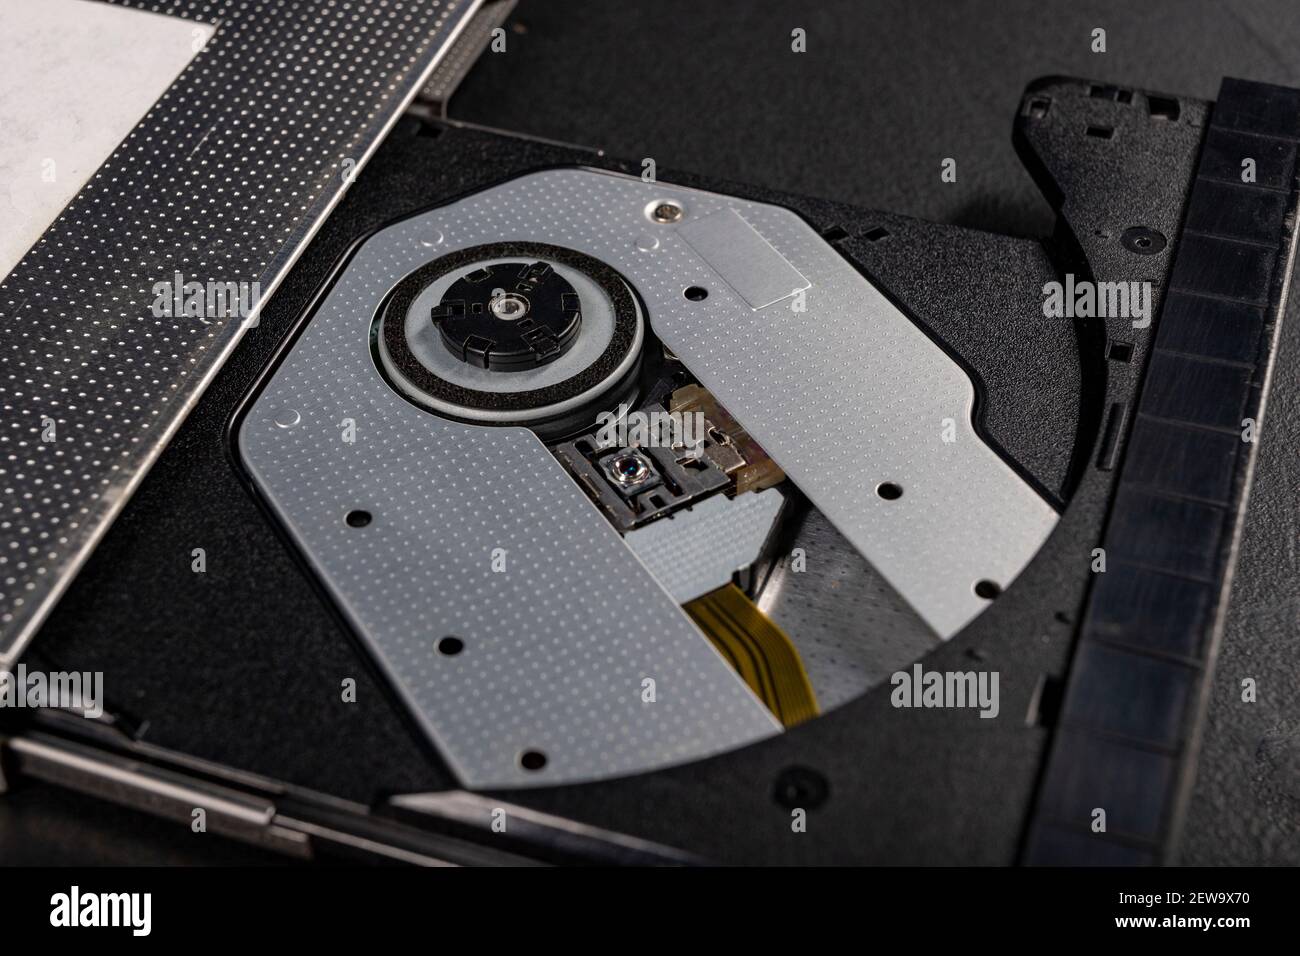 The inside of the CD reader. A laser mechanism for reading compact discs. Dark background. Stock Photo